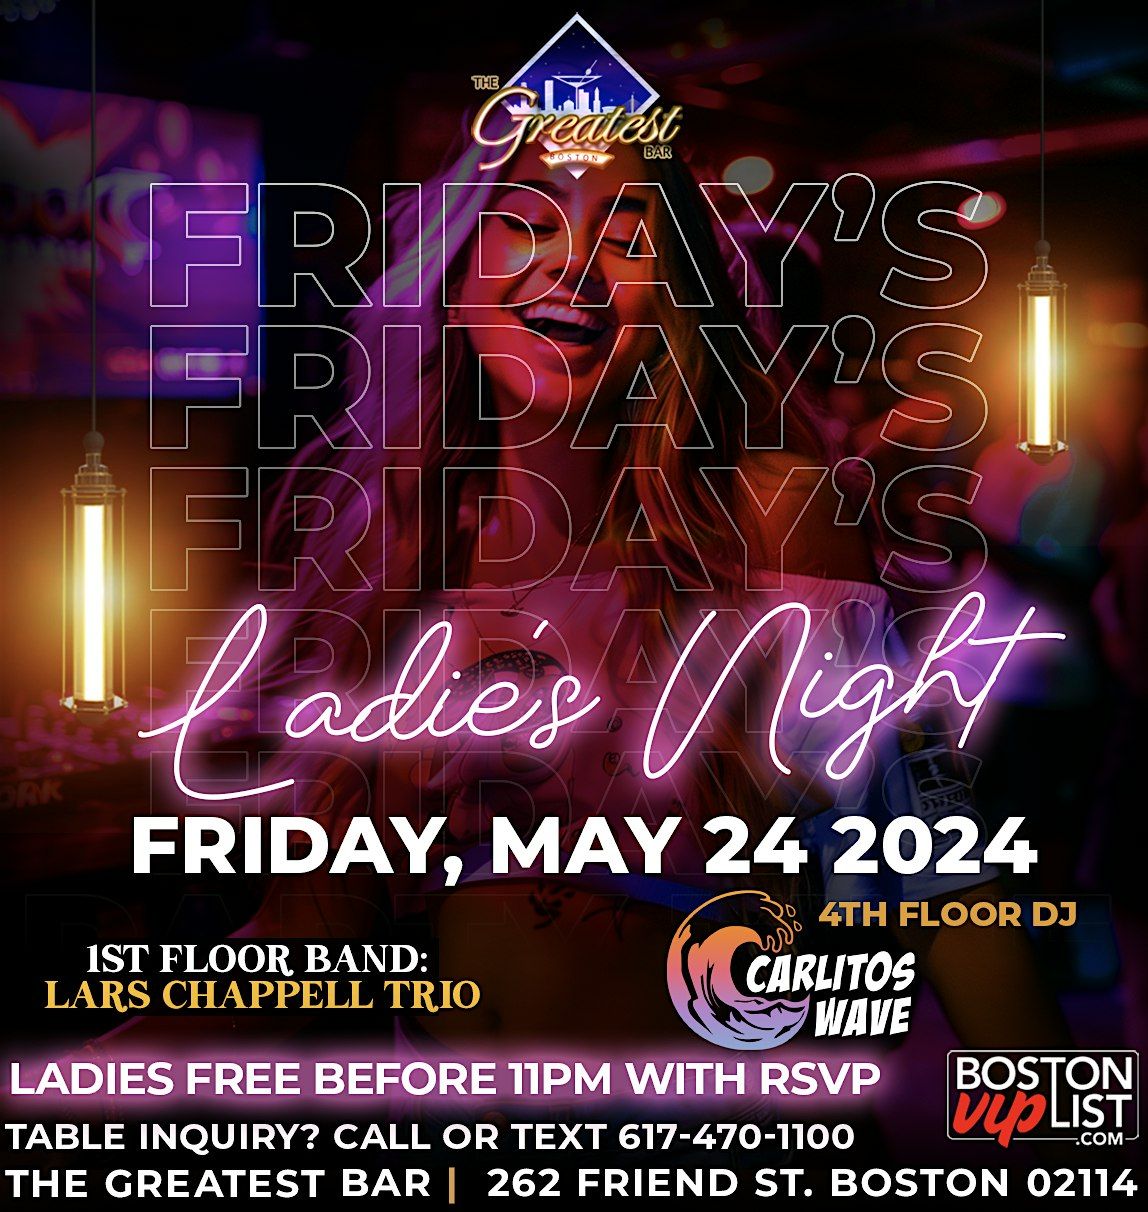 Ladies Night @ The Greatest Bar (Ladies FREE Before 11PM with RSVP)